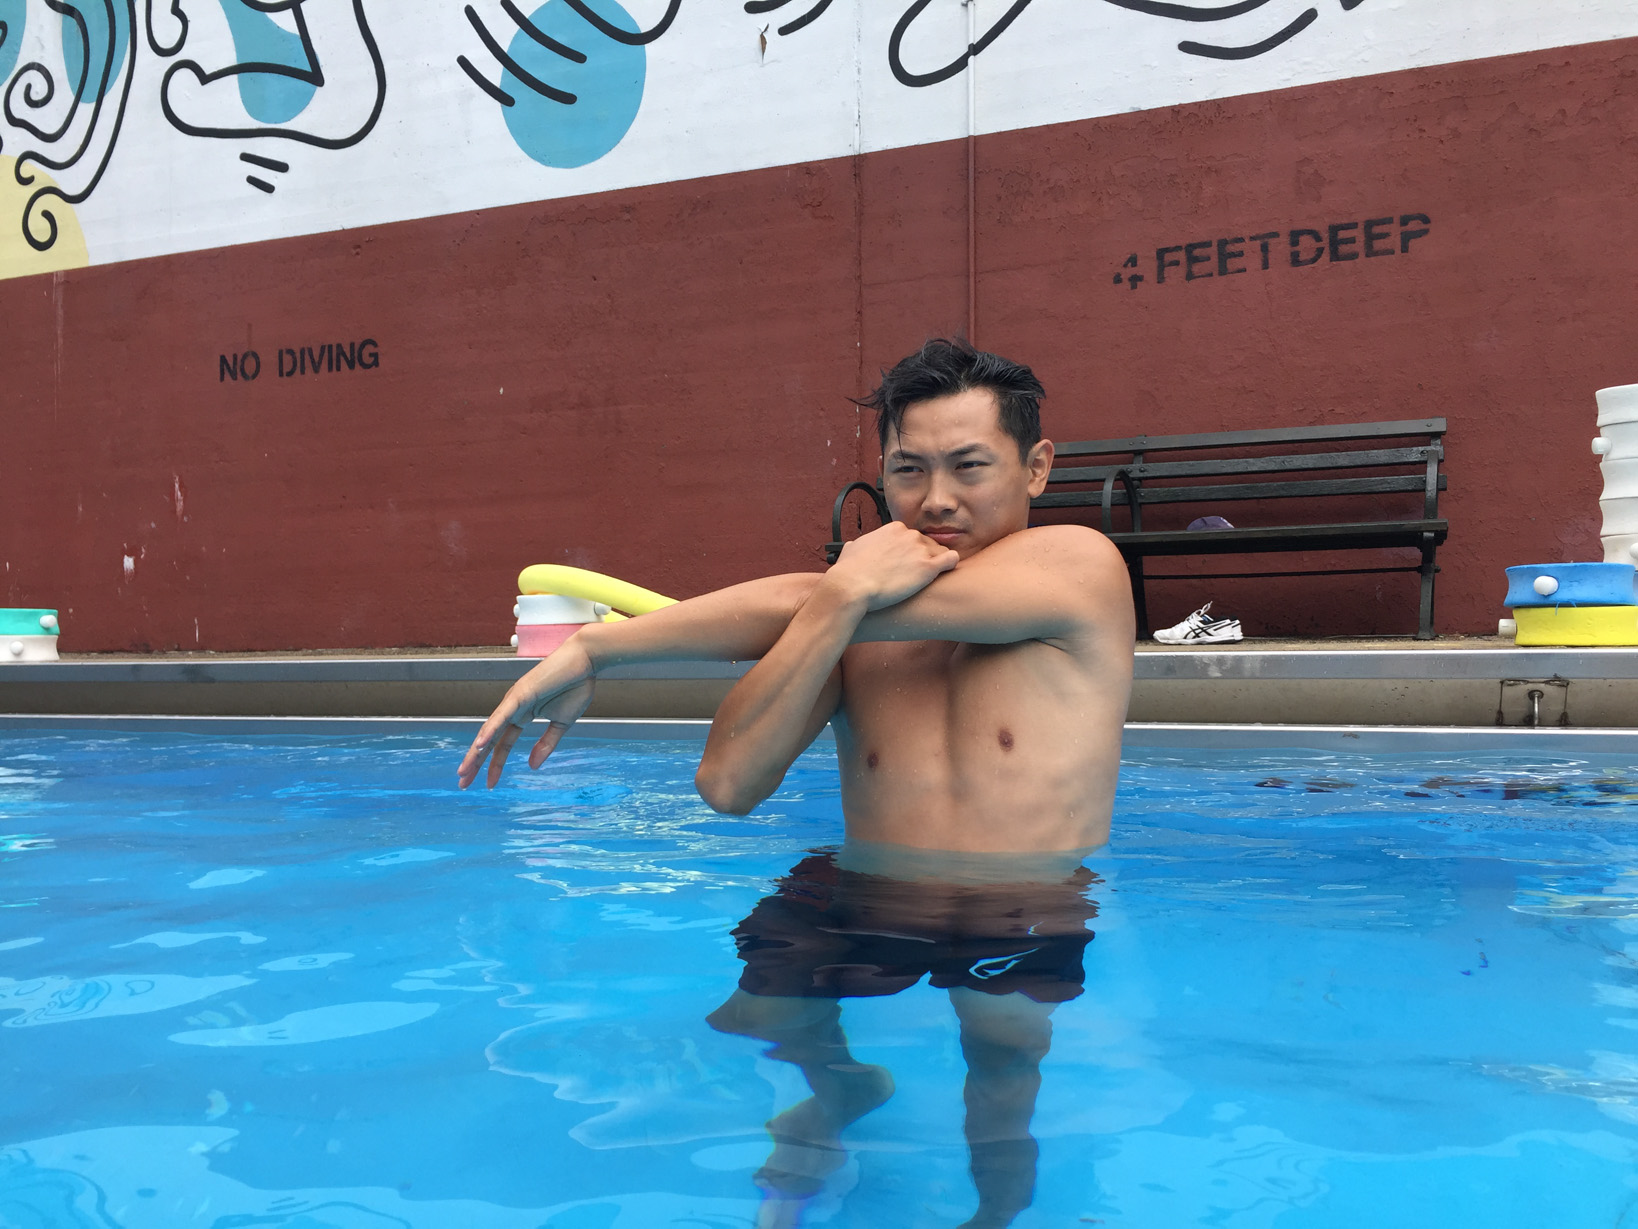 Huang frequently jumps in the water to show proper technique.